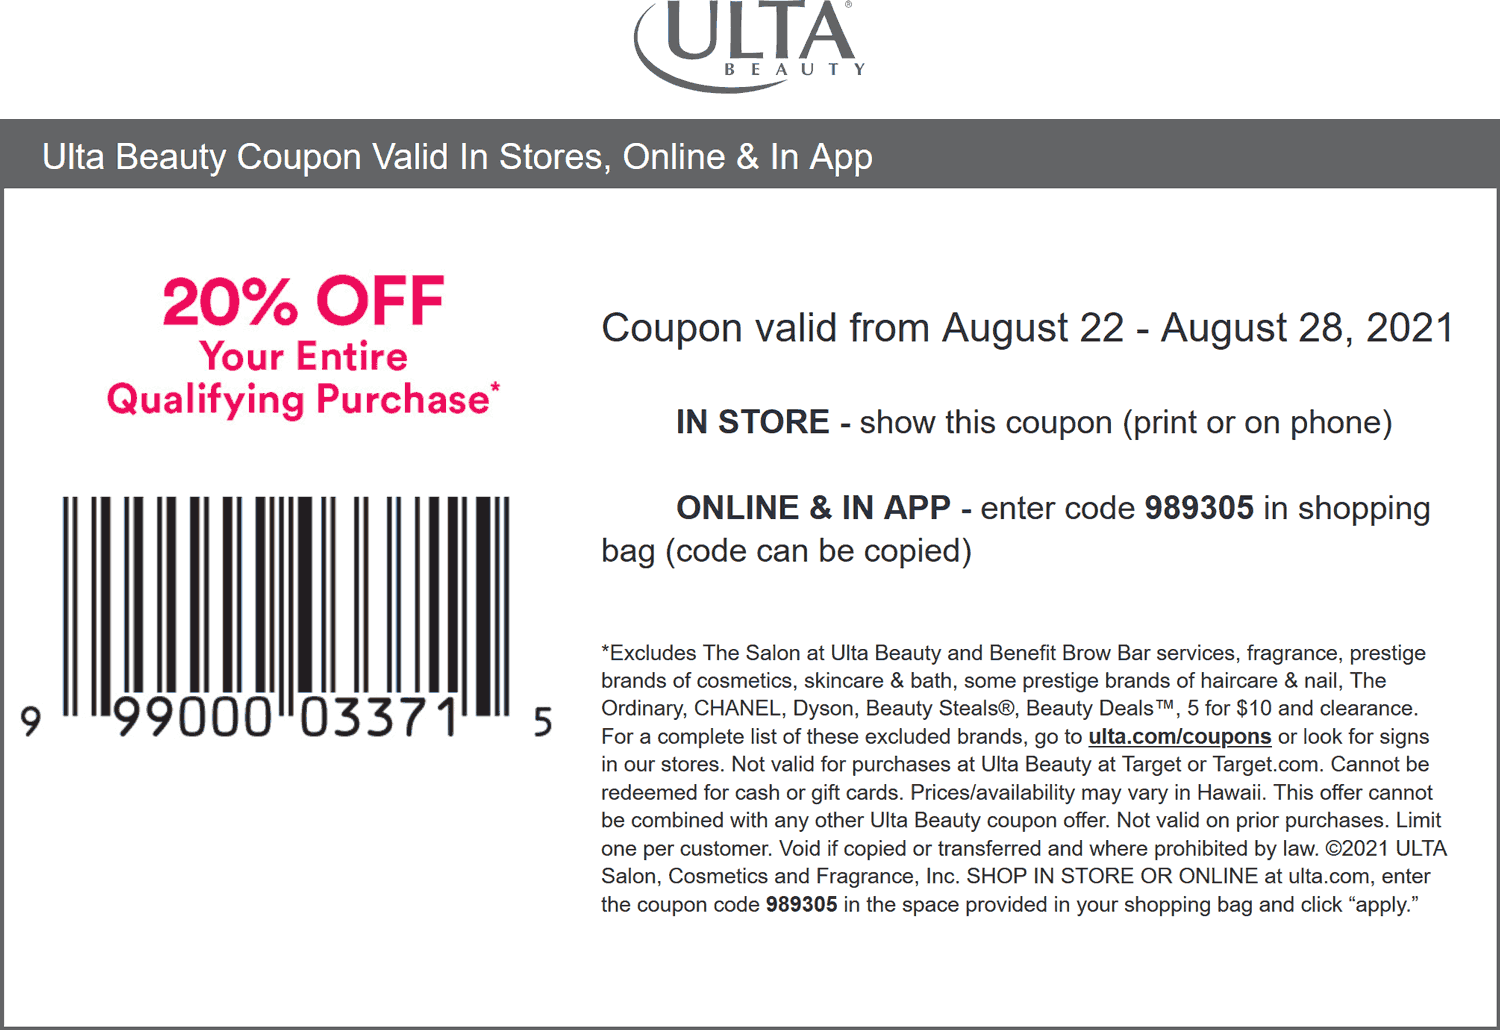 Ulta Beauty stores Coupon  20% off everything at Ulta Beauty, or online via promo code 989305 #ultabeauty 